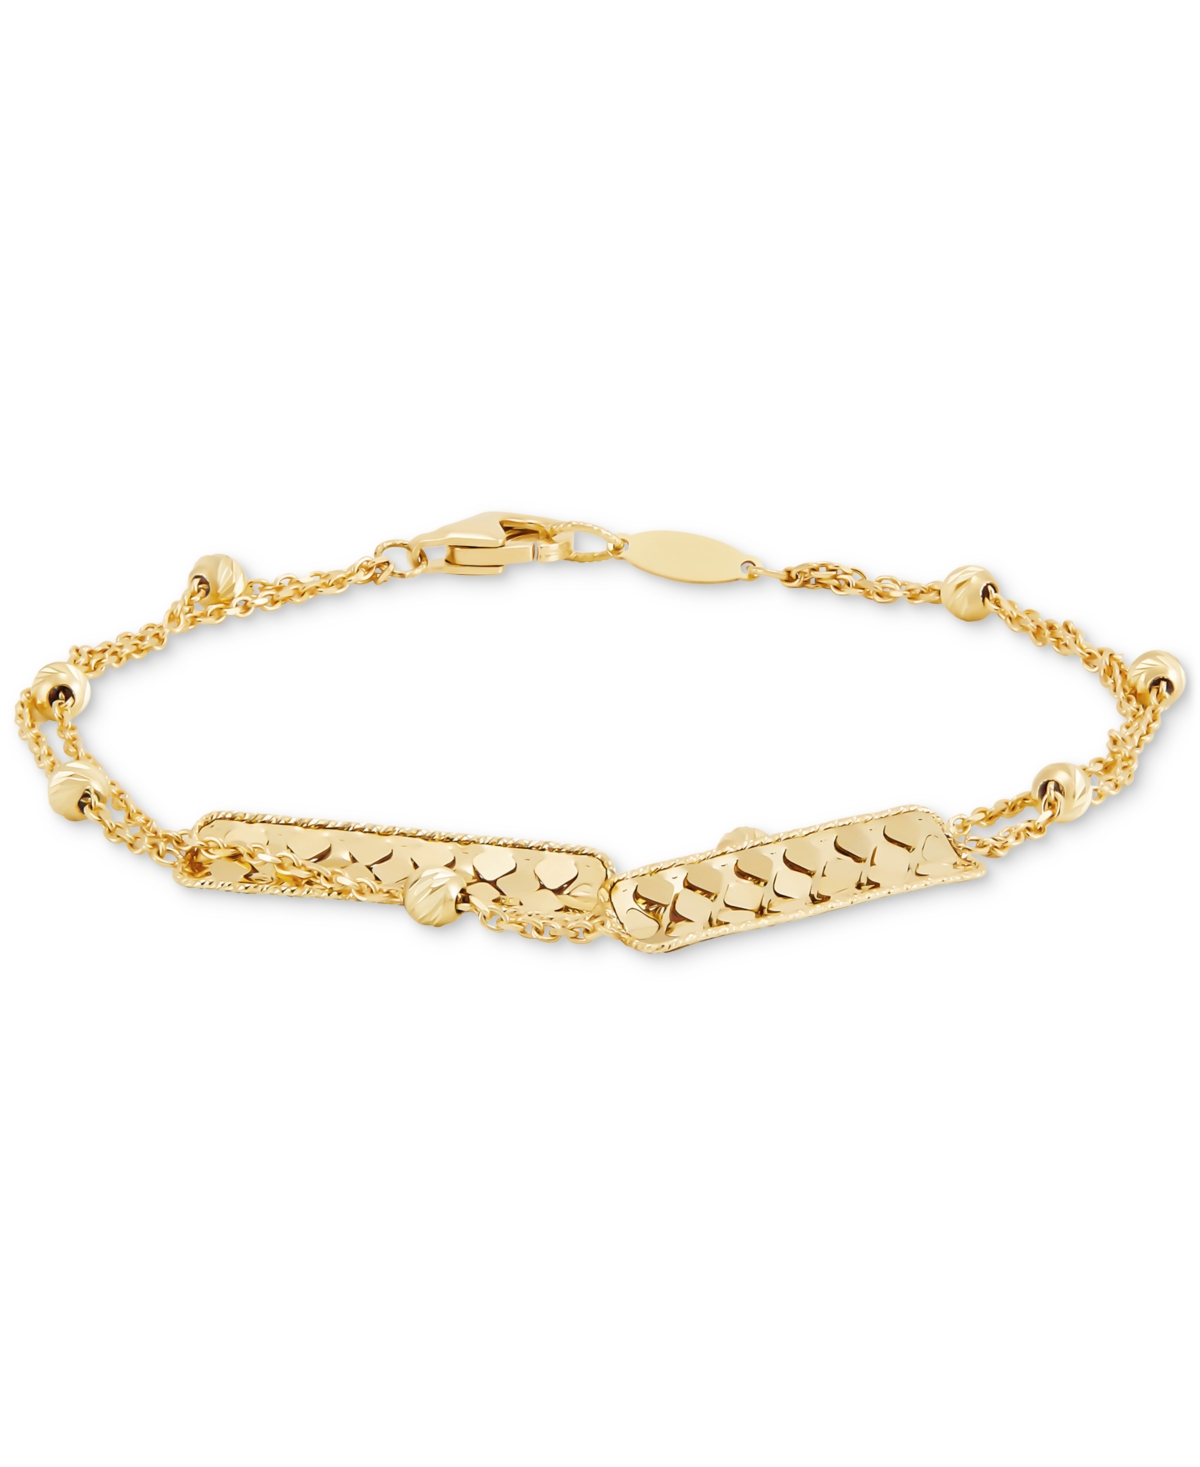 Polished Double Row Bar & Beads Station Link Bracelet in 14k Gold - Yellow Gold